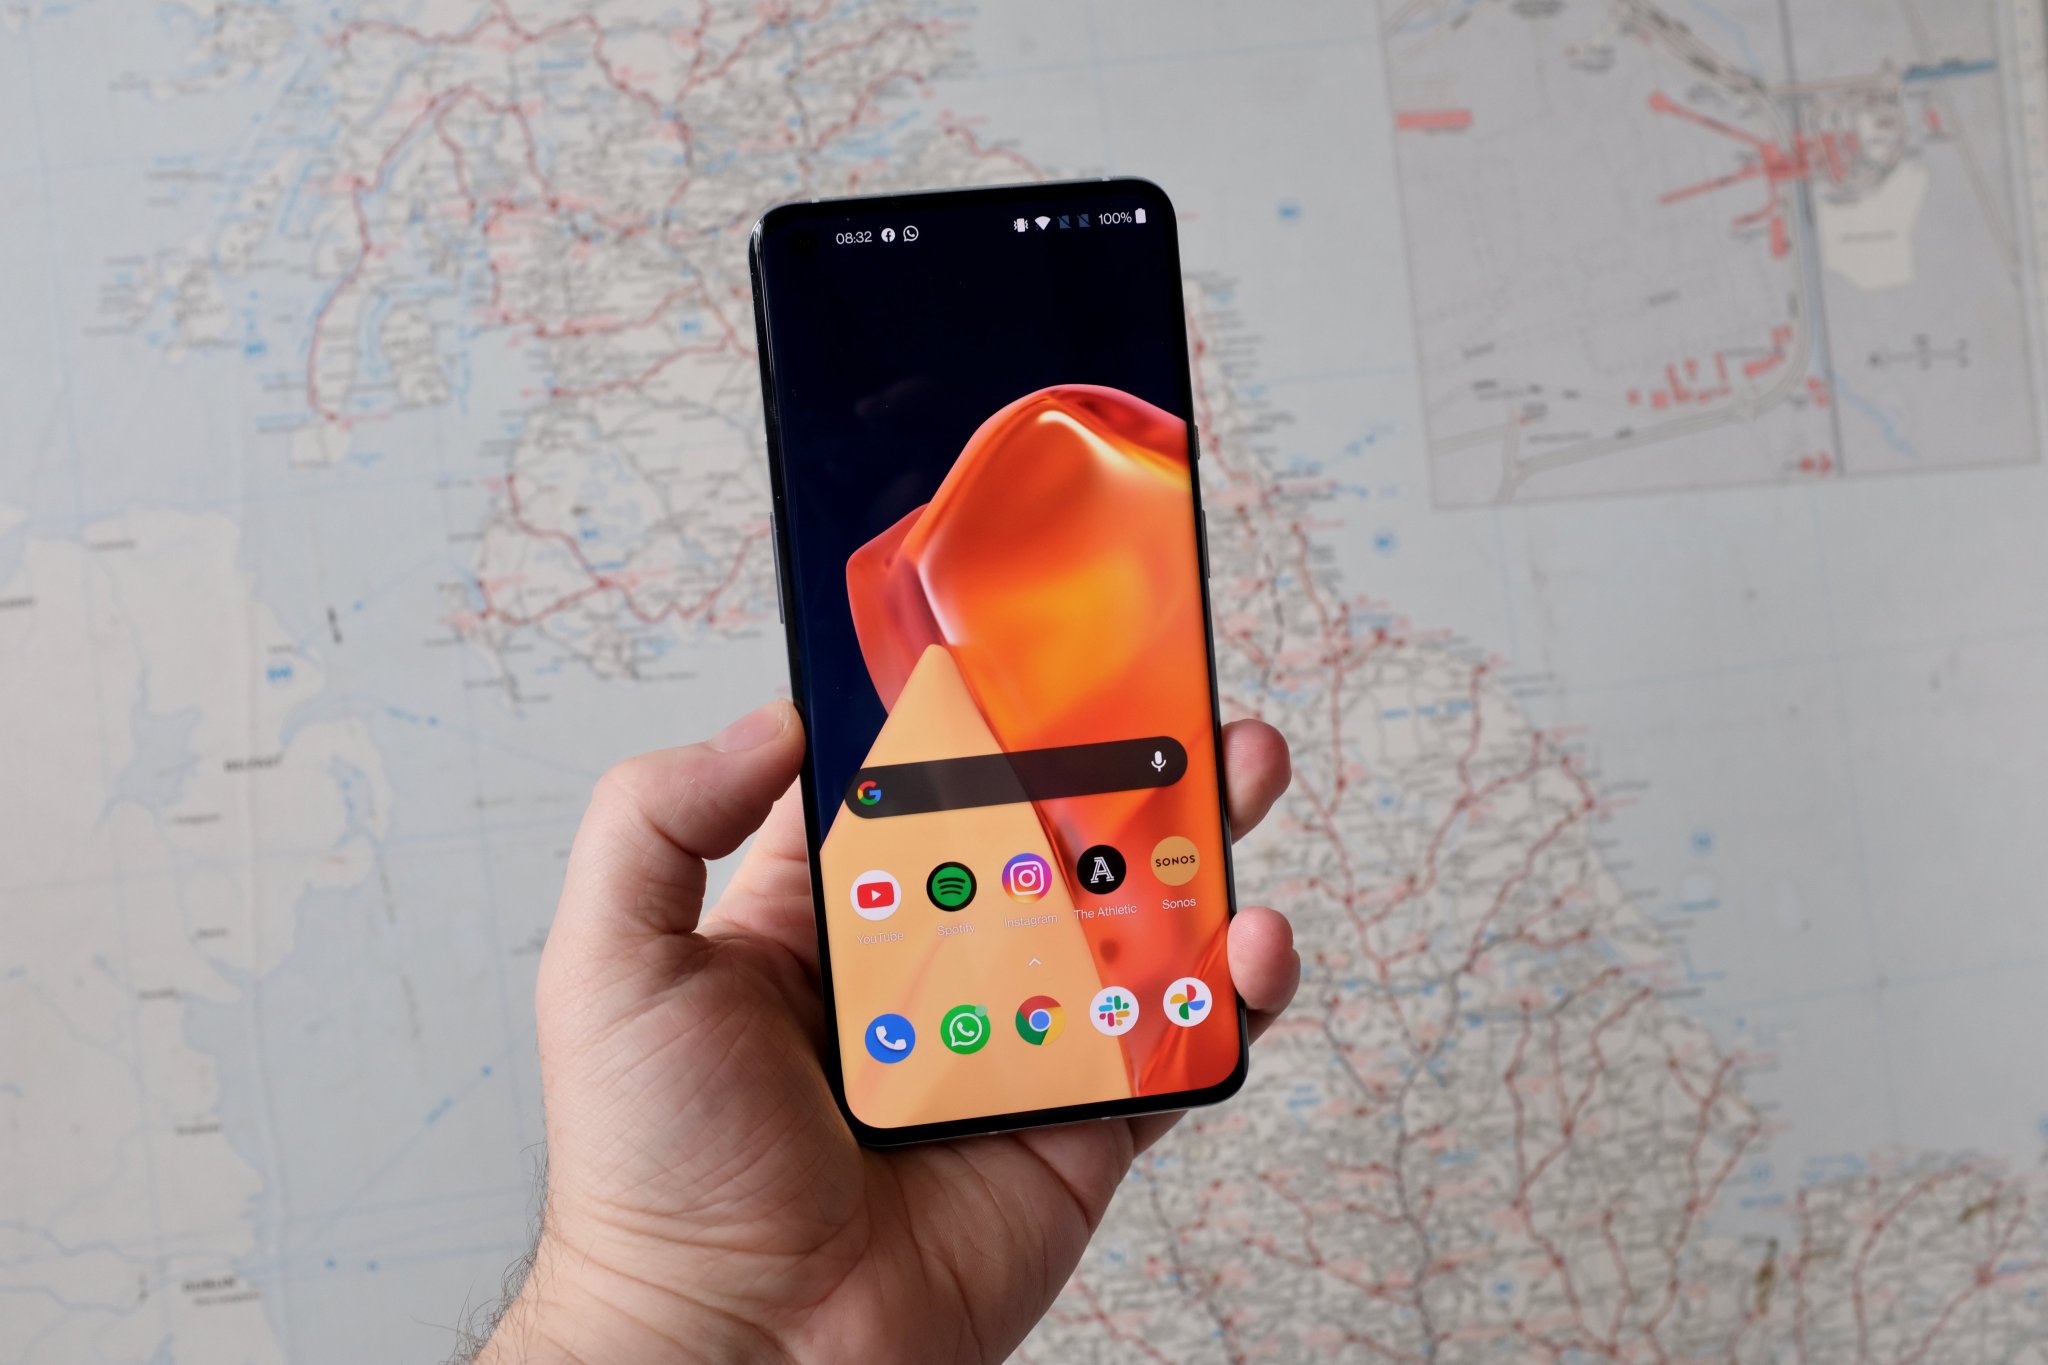 The excellent OnePlus 9 Pro has been given a phenomenal price slash